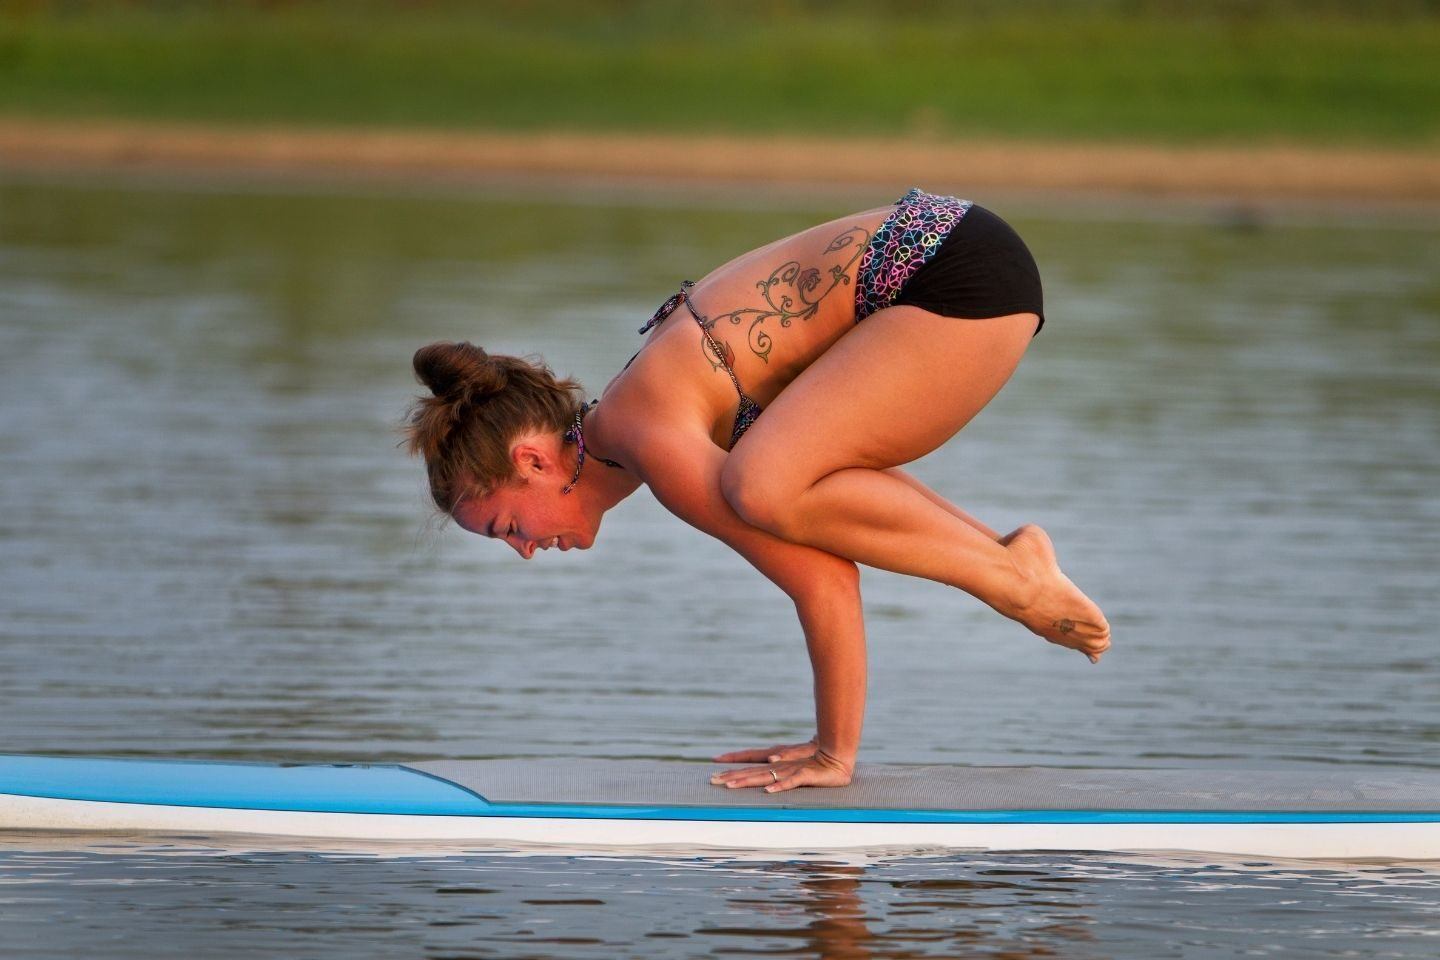 A woman practicing yoga on a paddle board